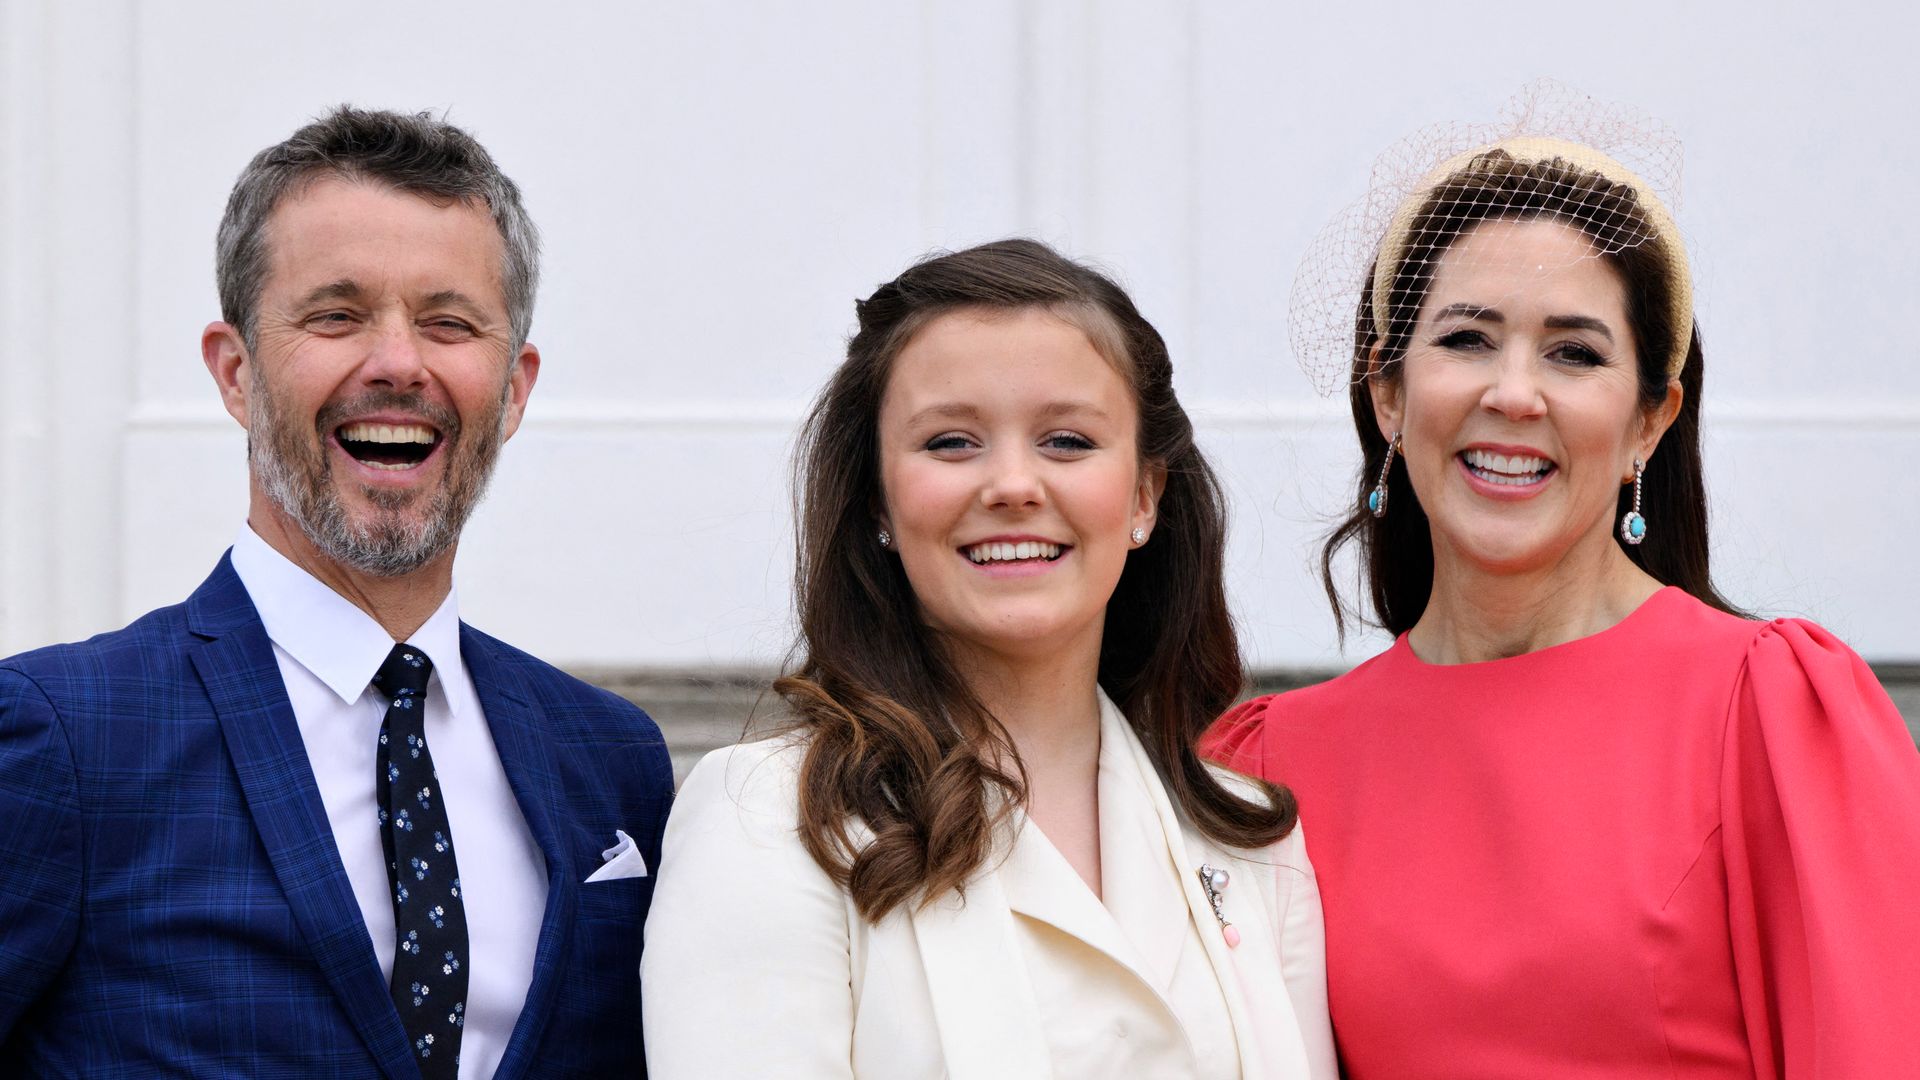 Queen Mary shares heartwarming photos of daughter Princess Isabella to mark special day